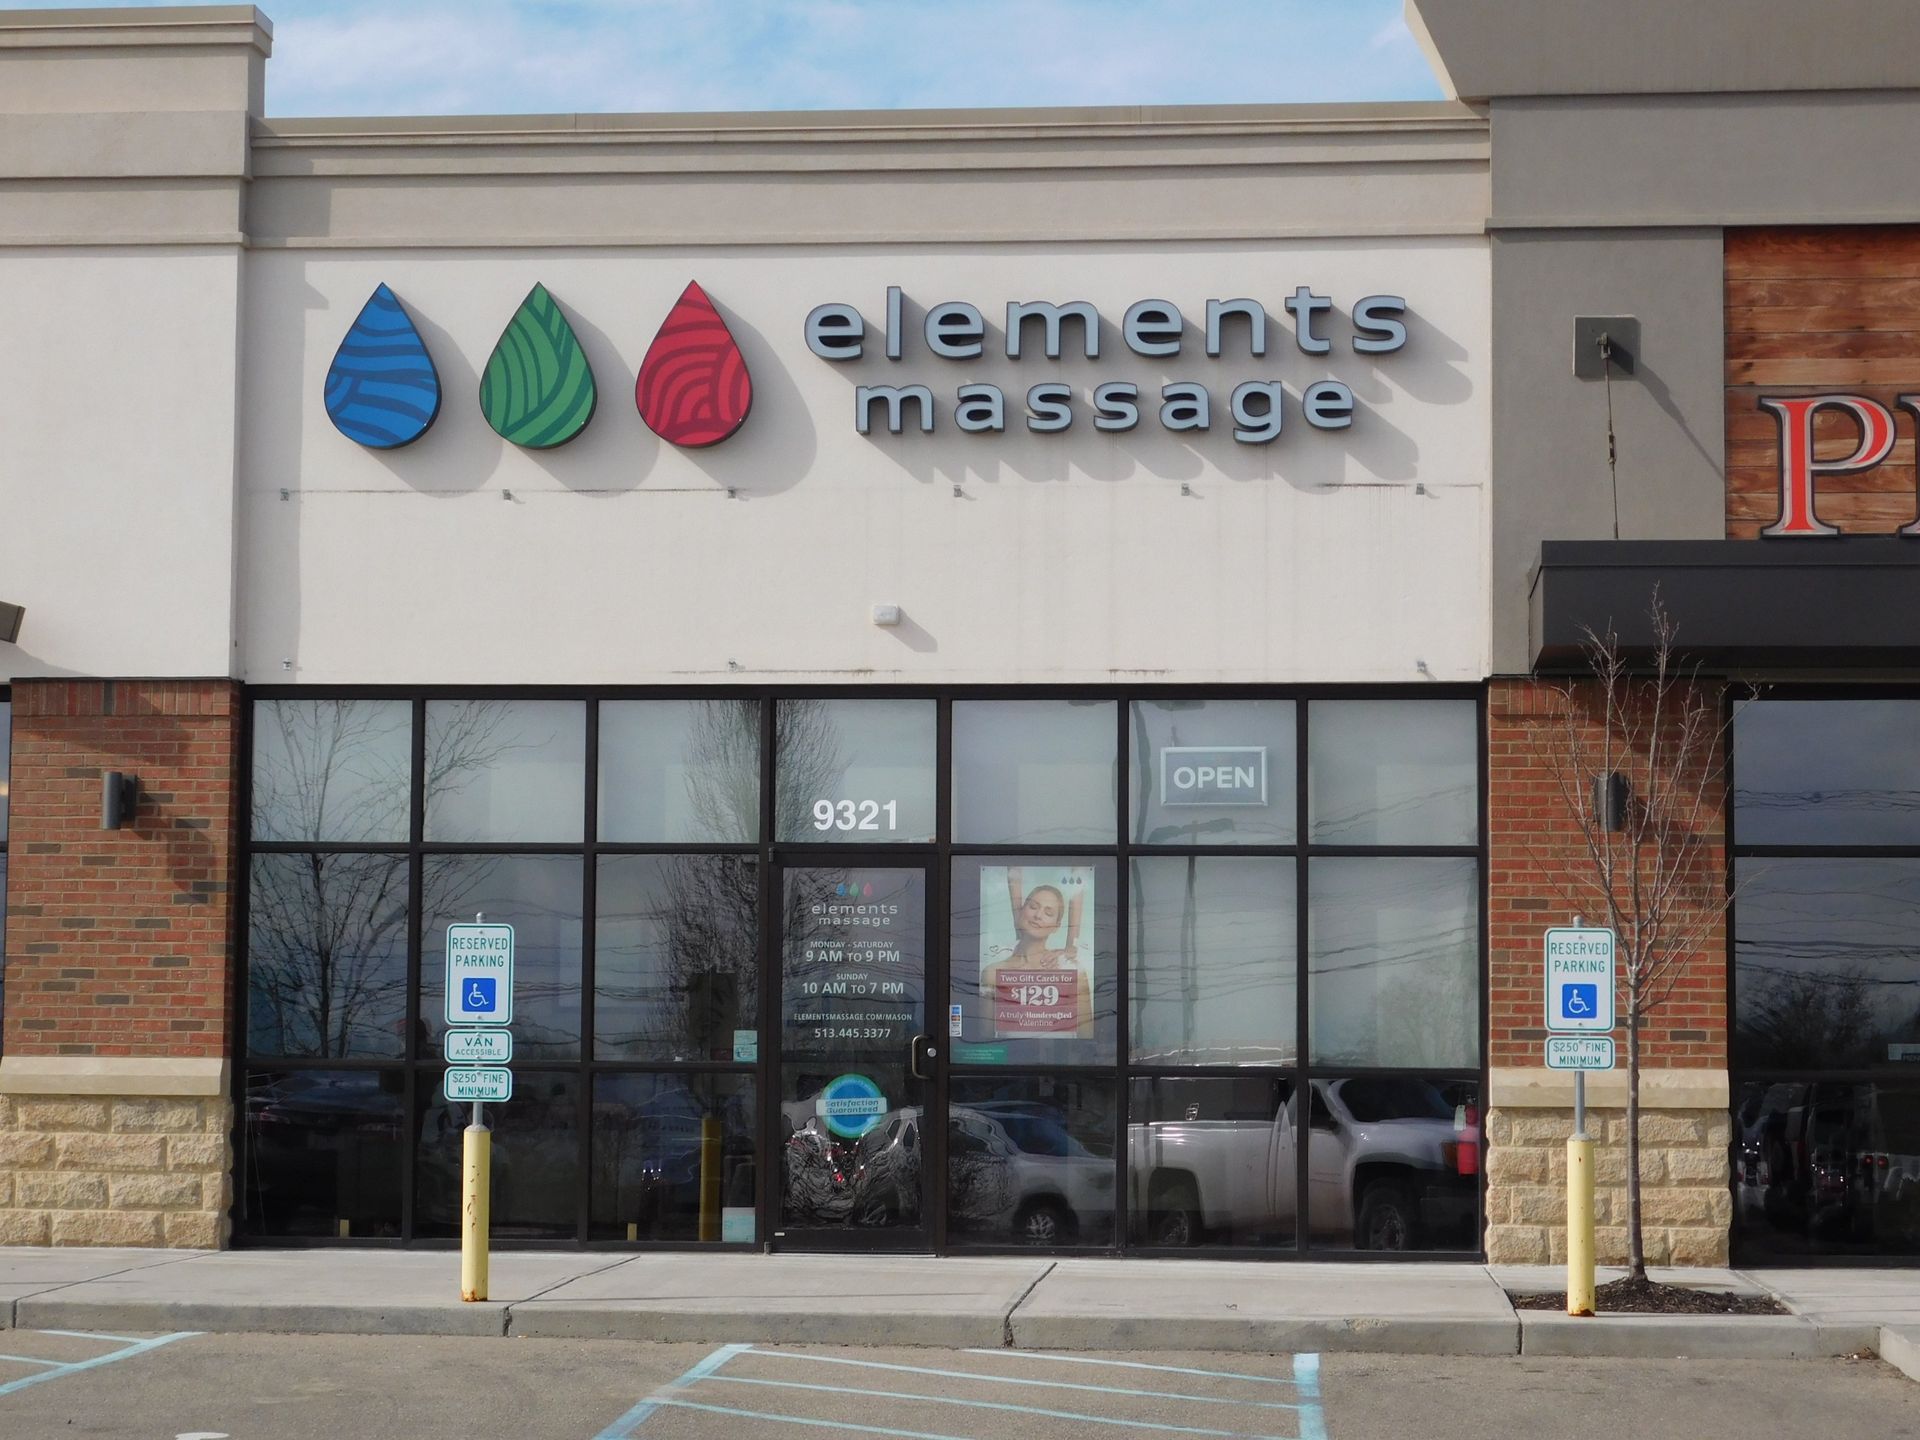 Elements massage west chester electrical work